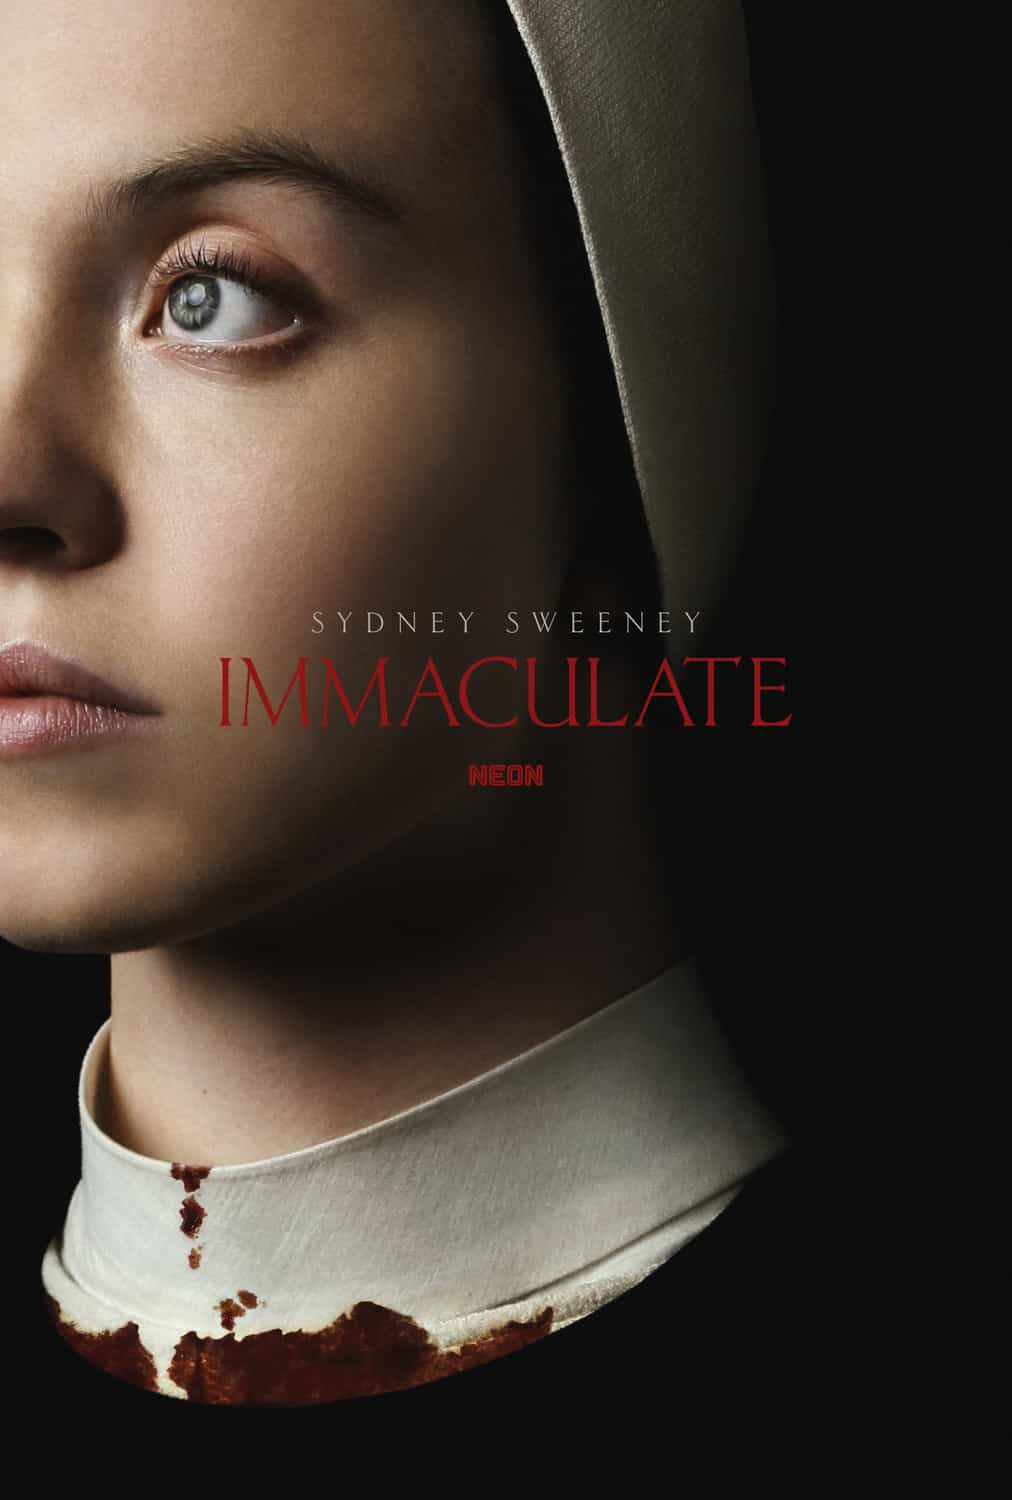 Immaculate has been given an 18 age rating in the UK for strong bloody violence